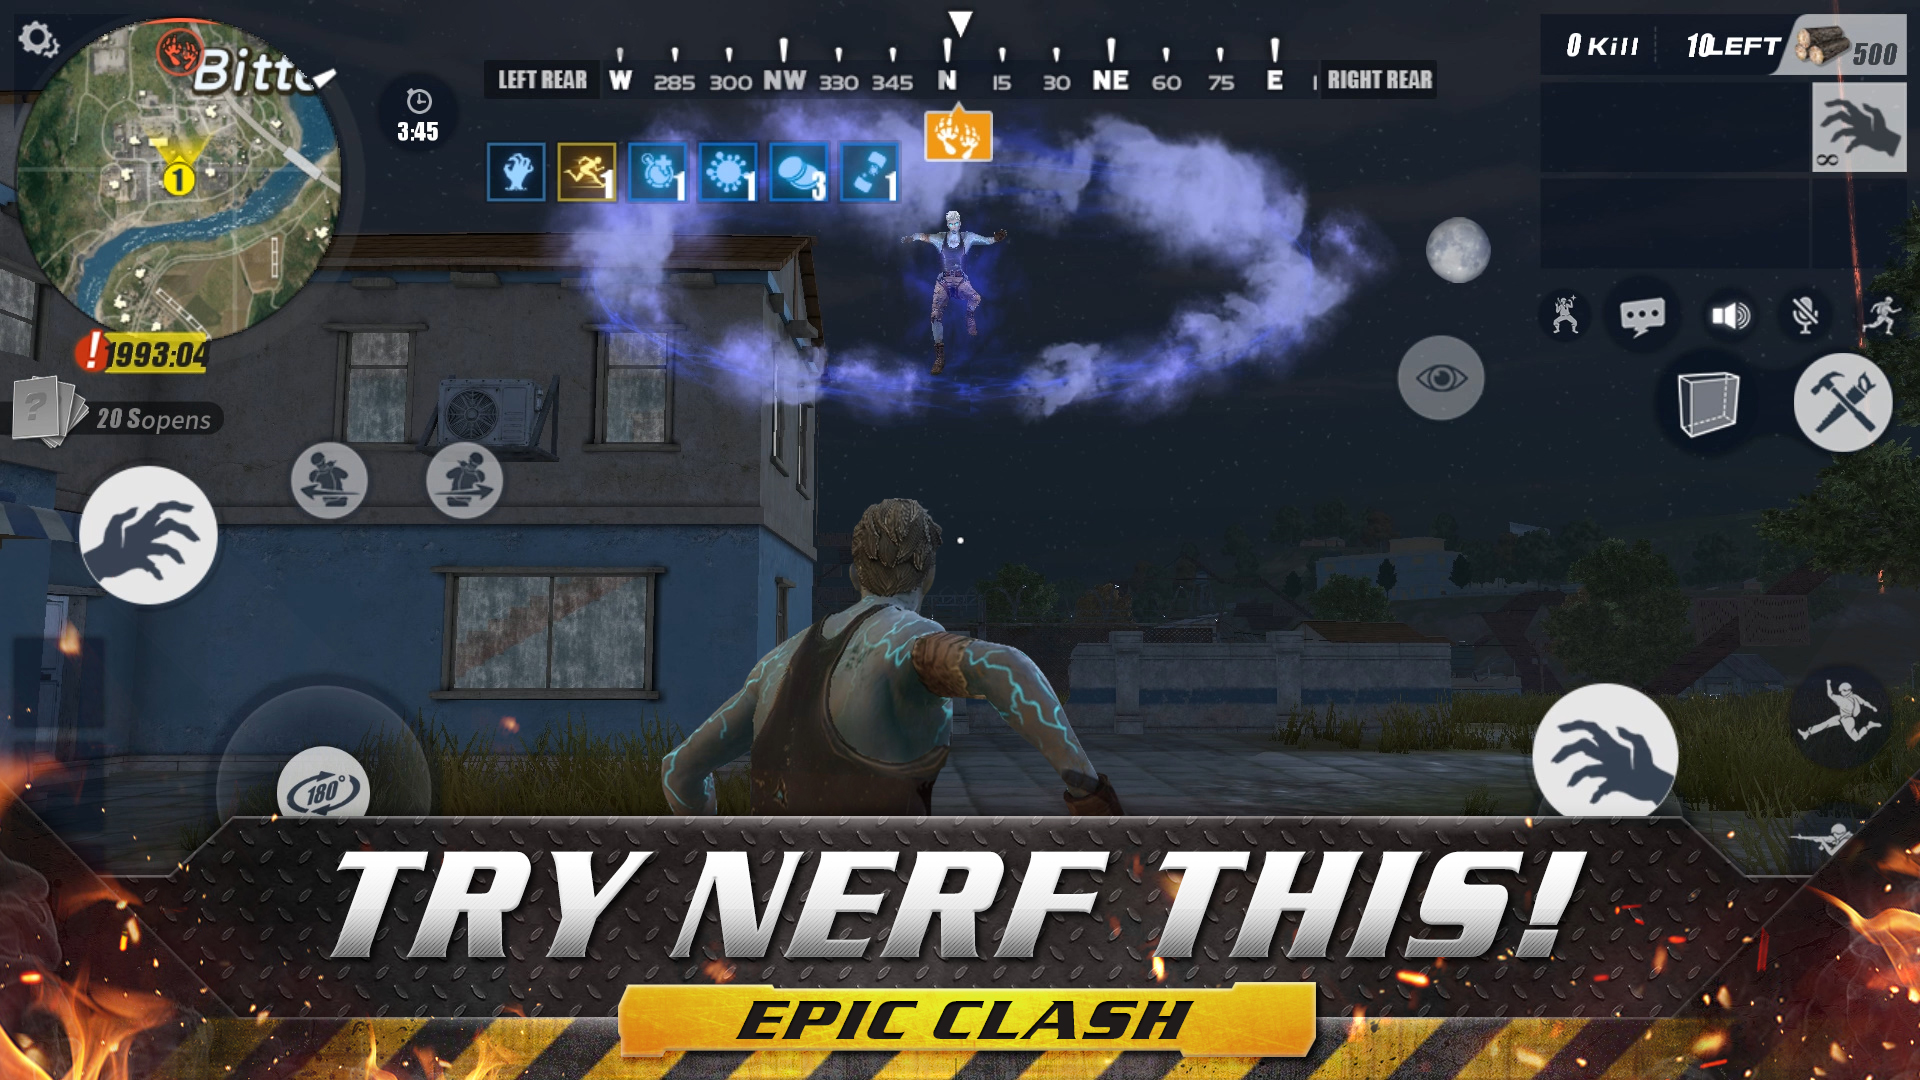 Rules of Survival Epic Clash is Online with the Most Insane Super